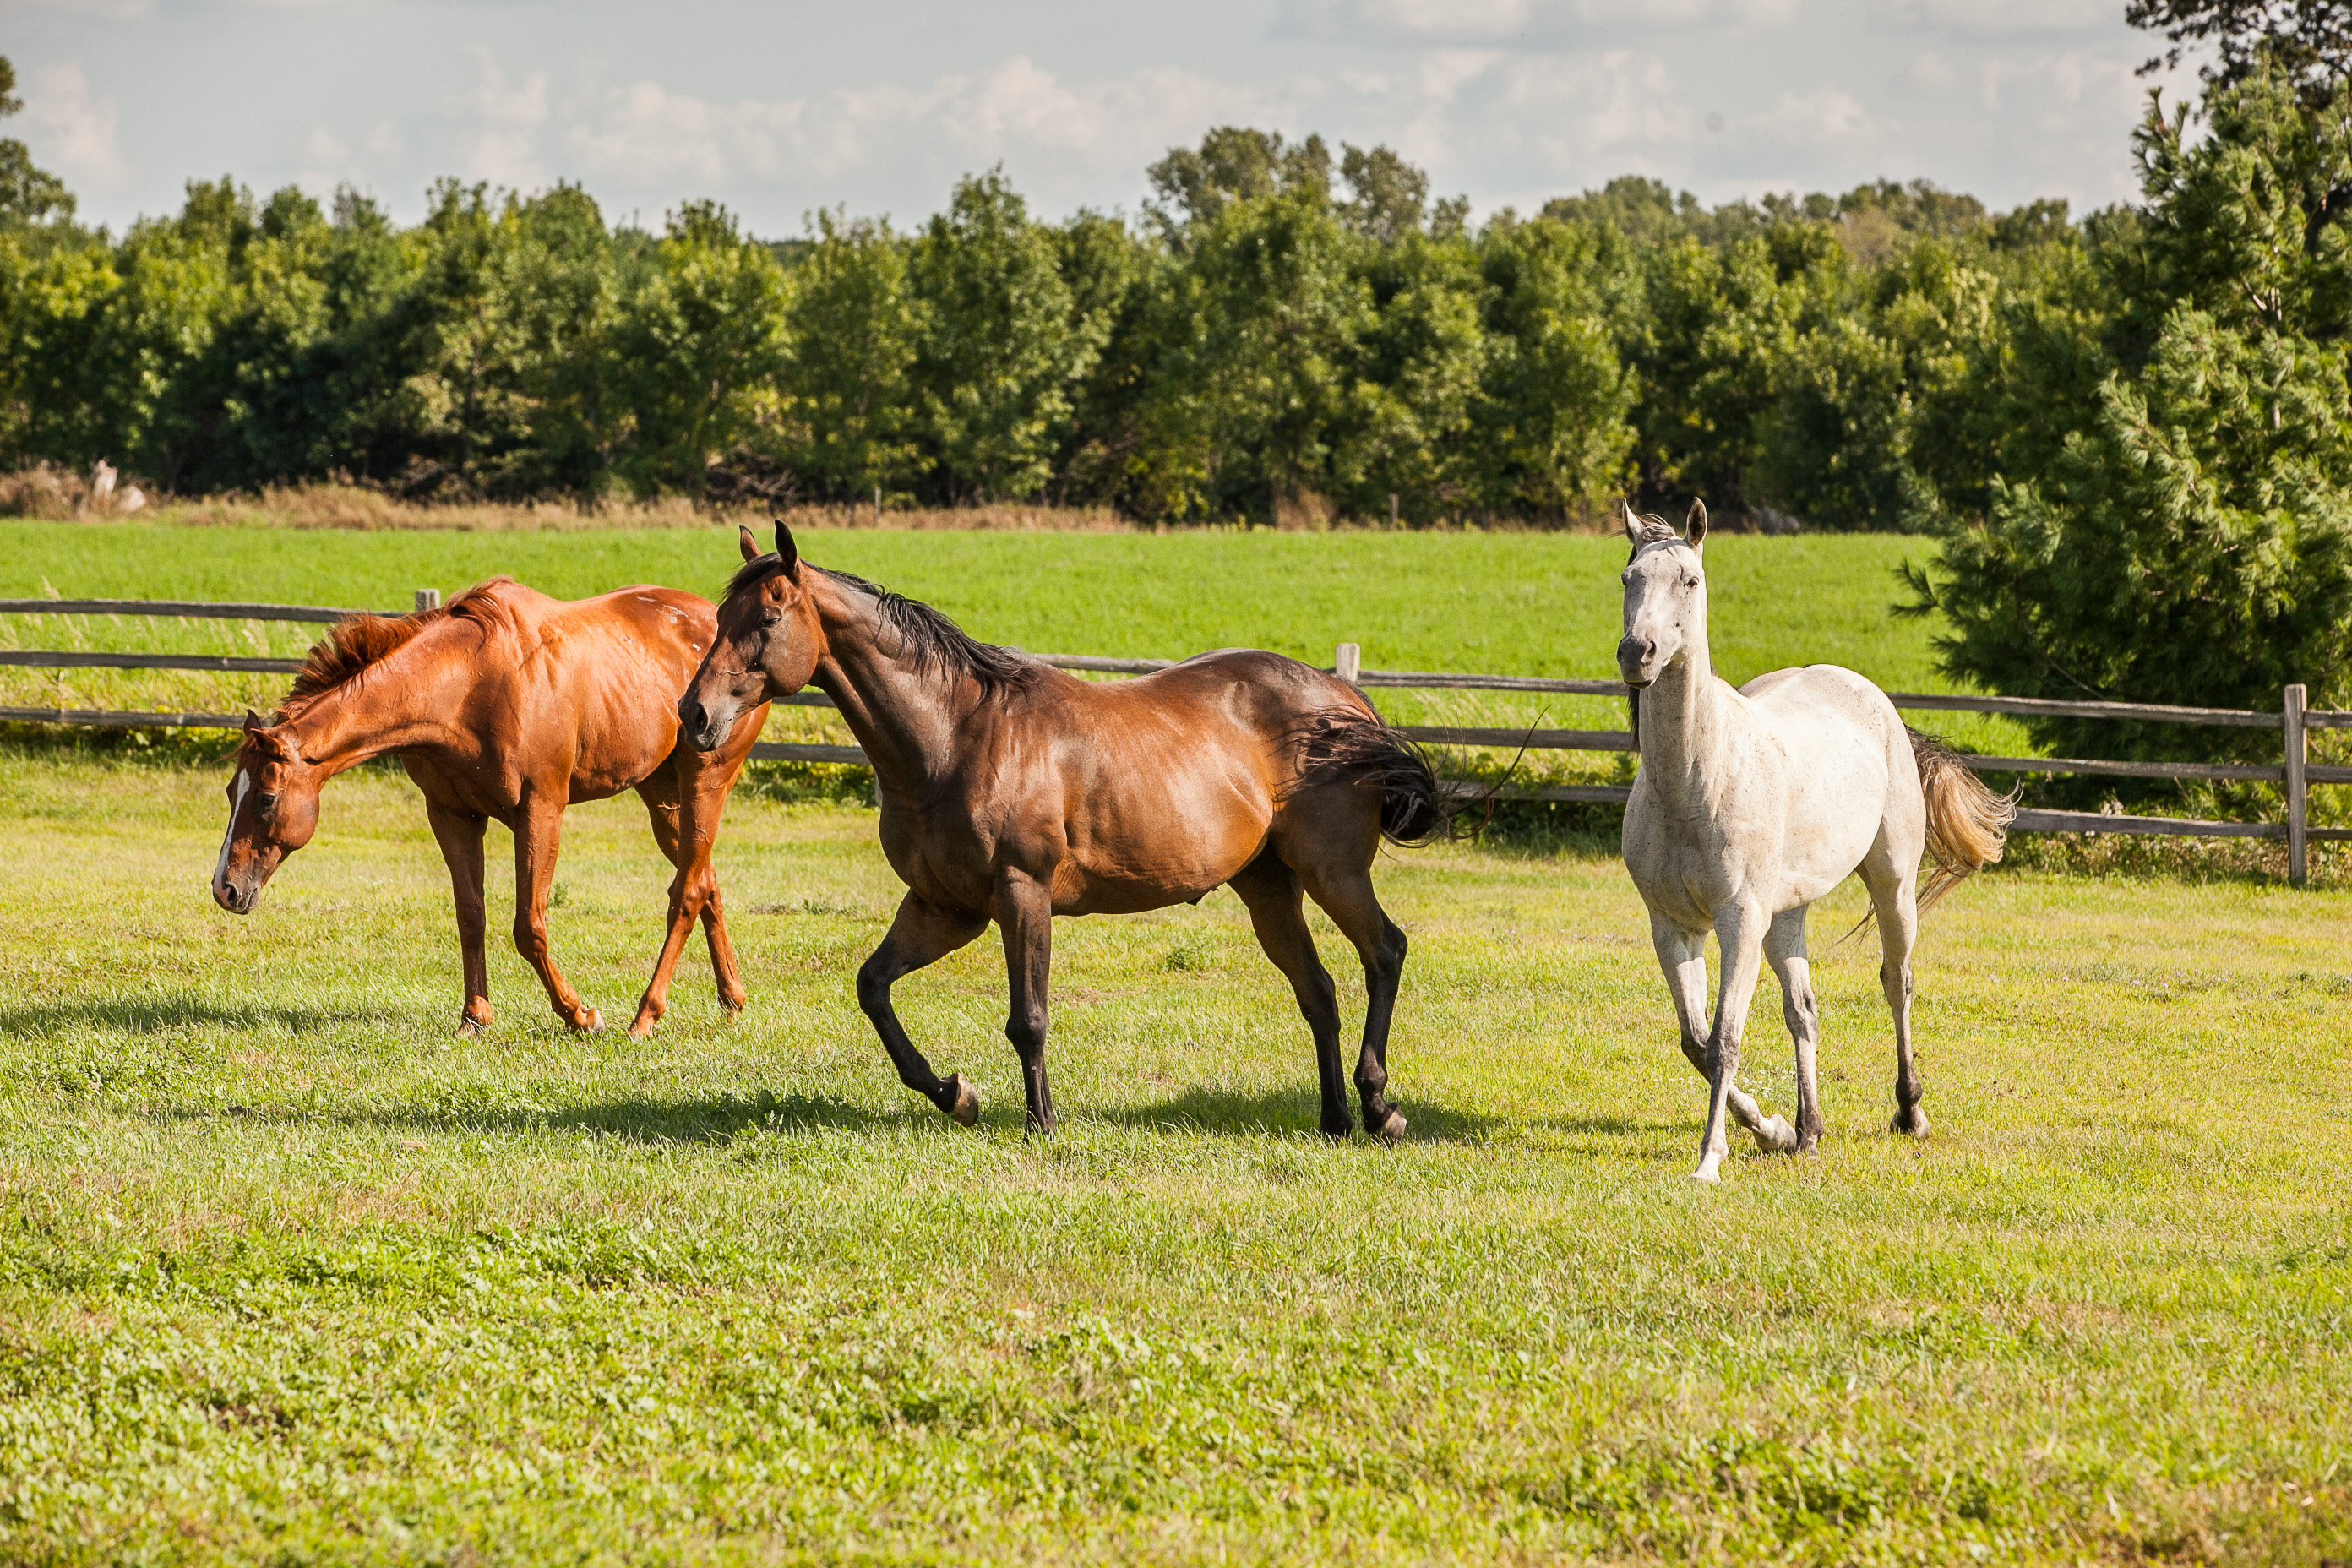 different types of horses in a field